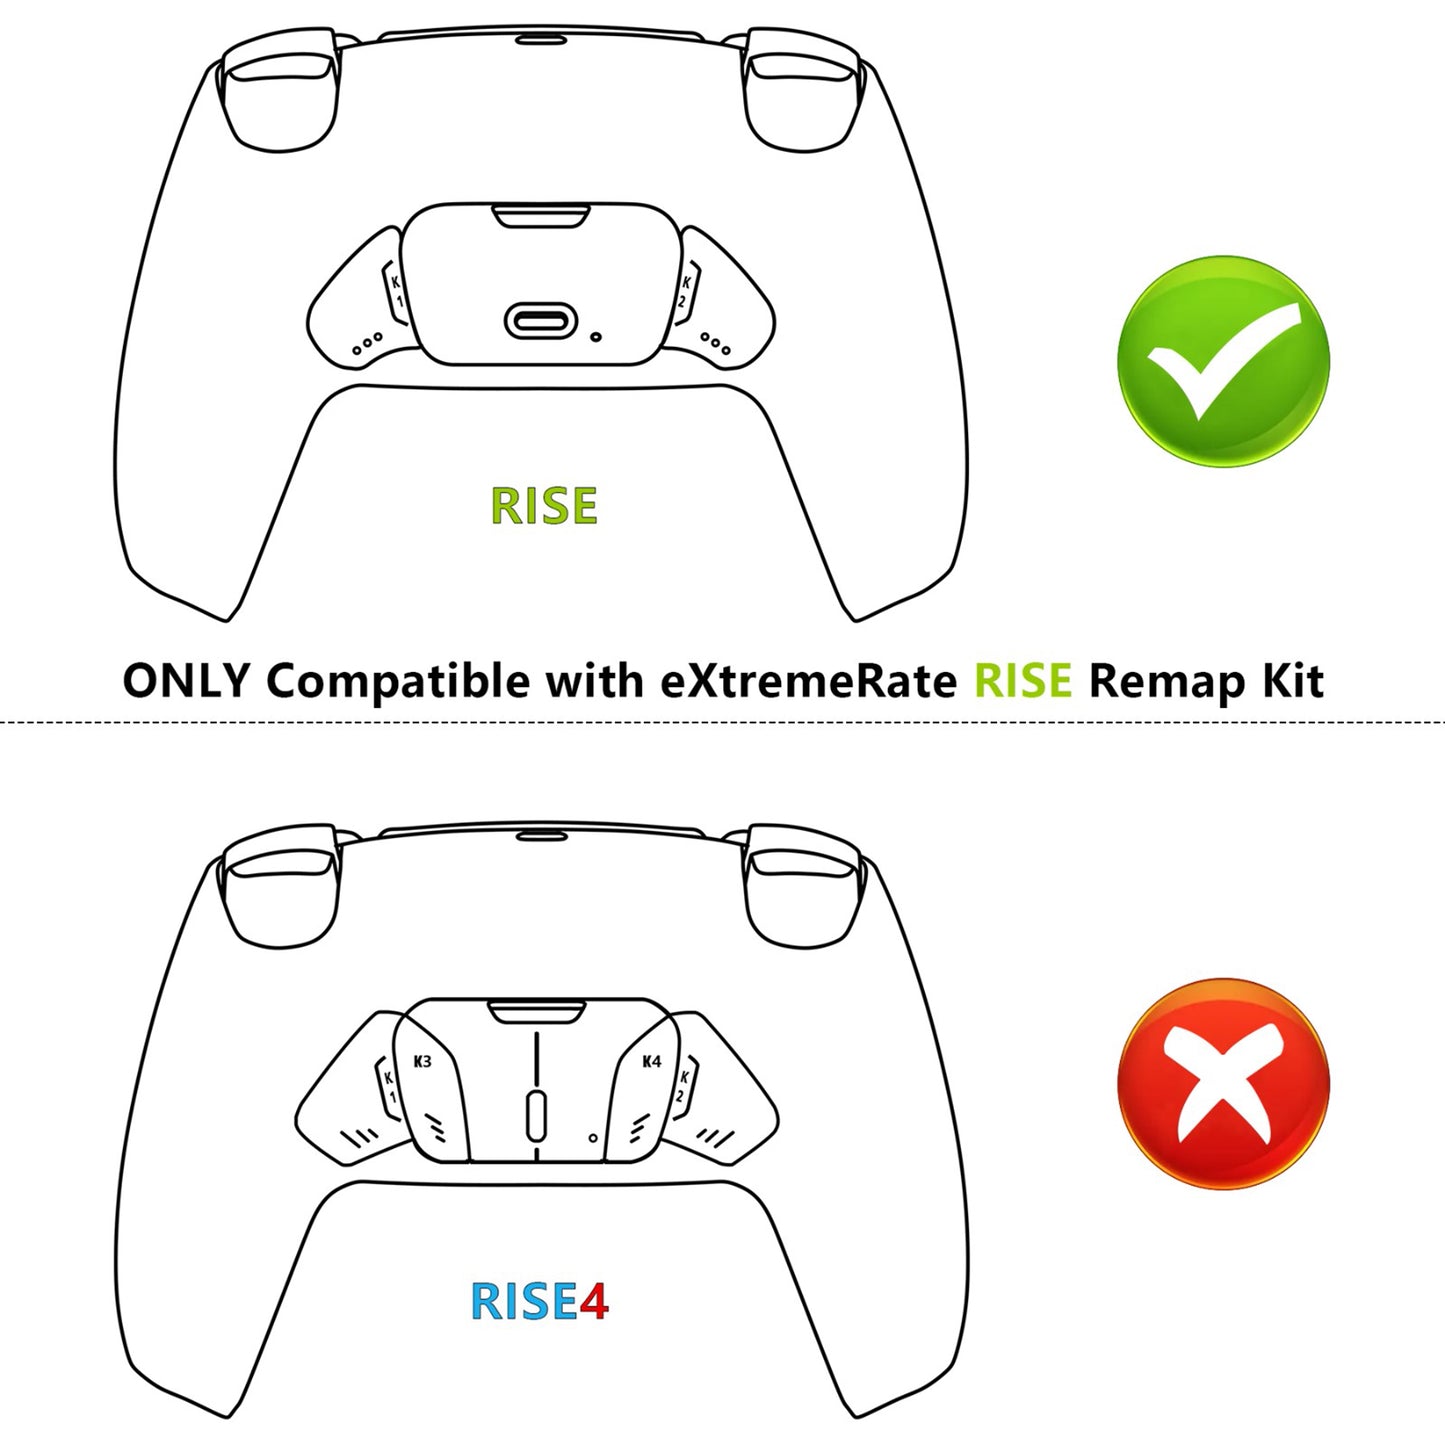 eXtremeRate Real Metal Buttons (RMB) Version Redesigned K1 K2 Back Buttons & Remap PCB Board for eXtremerate RISE Remap Kit, Compatible with PS5 Controller - Metallic Rainbow Aura Blue & Purple eXtremeRate